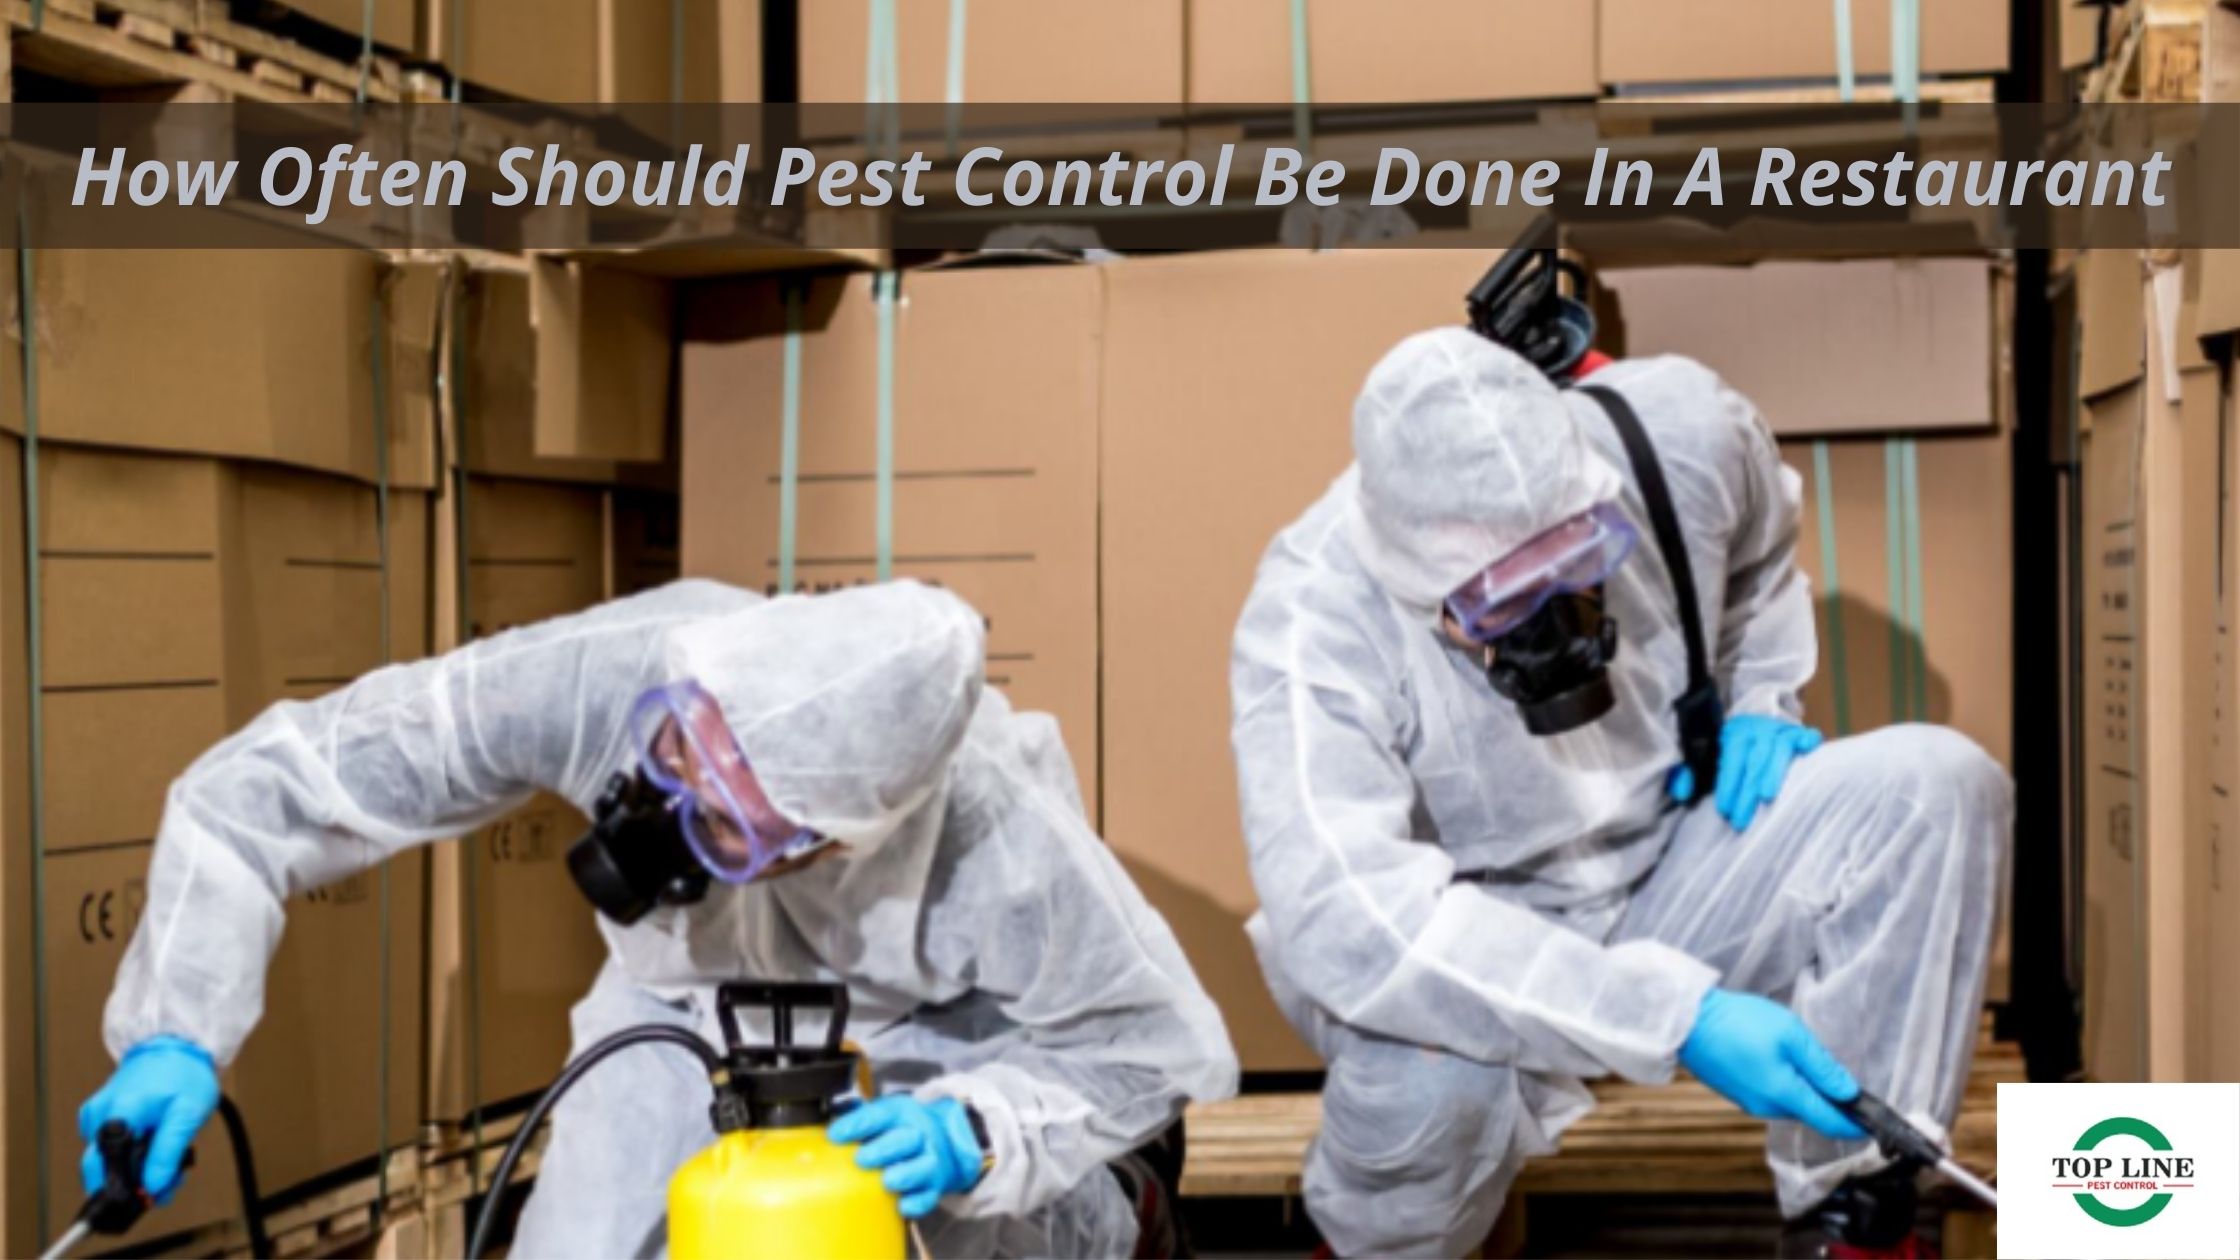 How Often Should Pest Control Be Done In A Restaurant